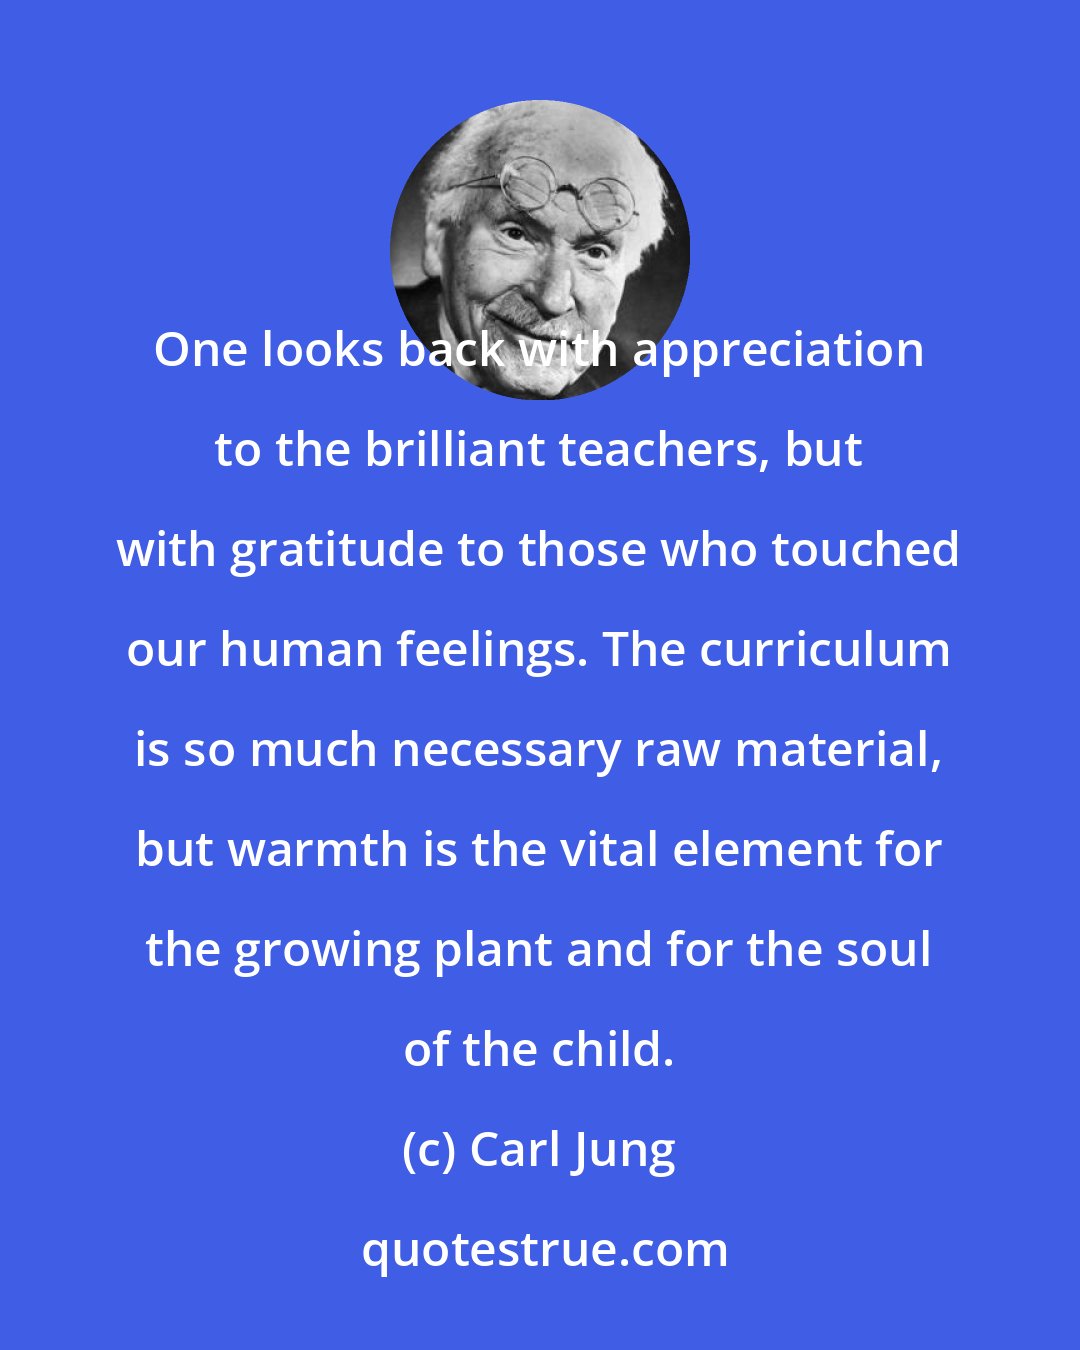 Carl Jung: One looks back with appreciation to the brilliant teachers, but with gratitude to those who touched our human feelings. The curriculum is so much necessary raw material, but warmth is the vital element for the growing plant and for the soul of the child.